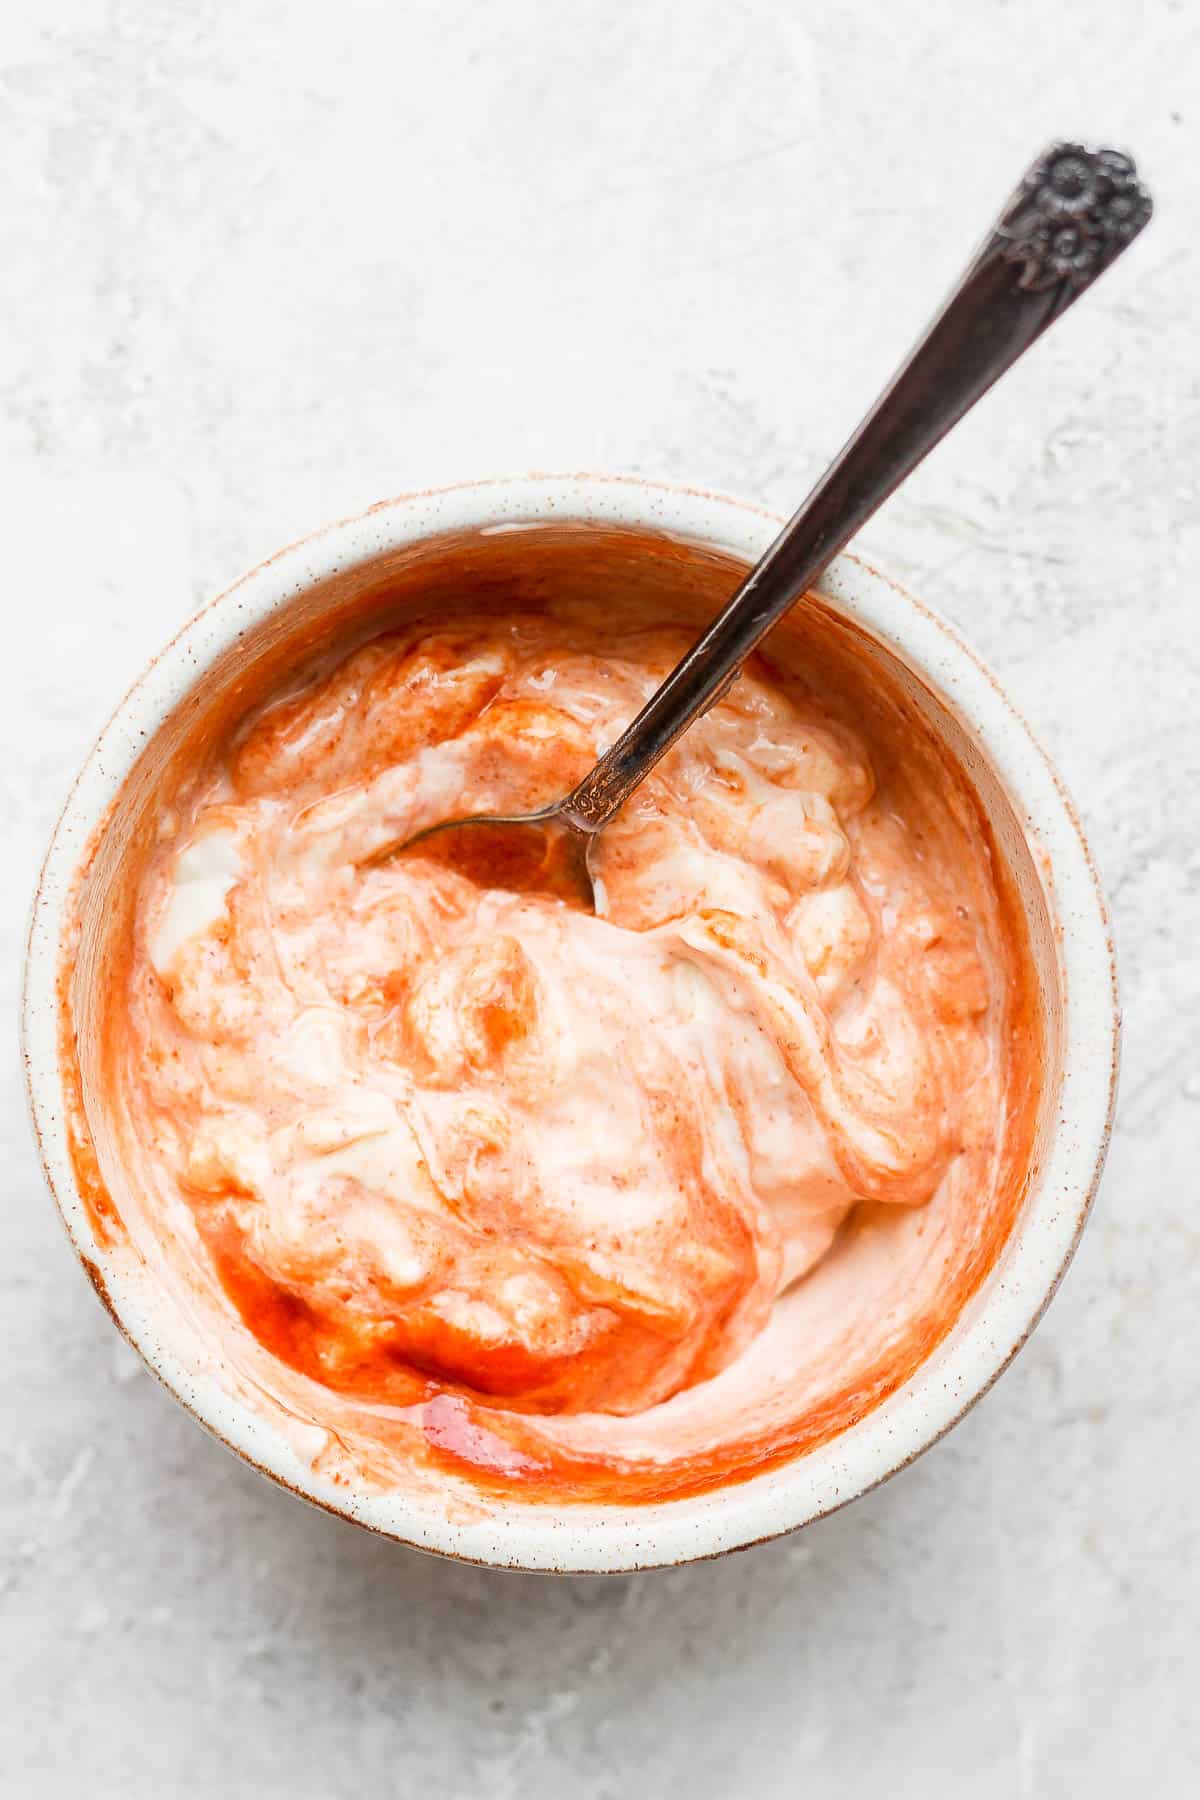 Mayo and Sriracha mixed together in a small bowl.